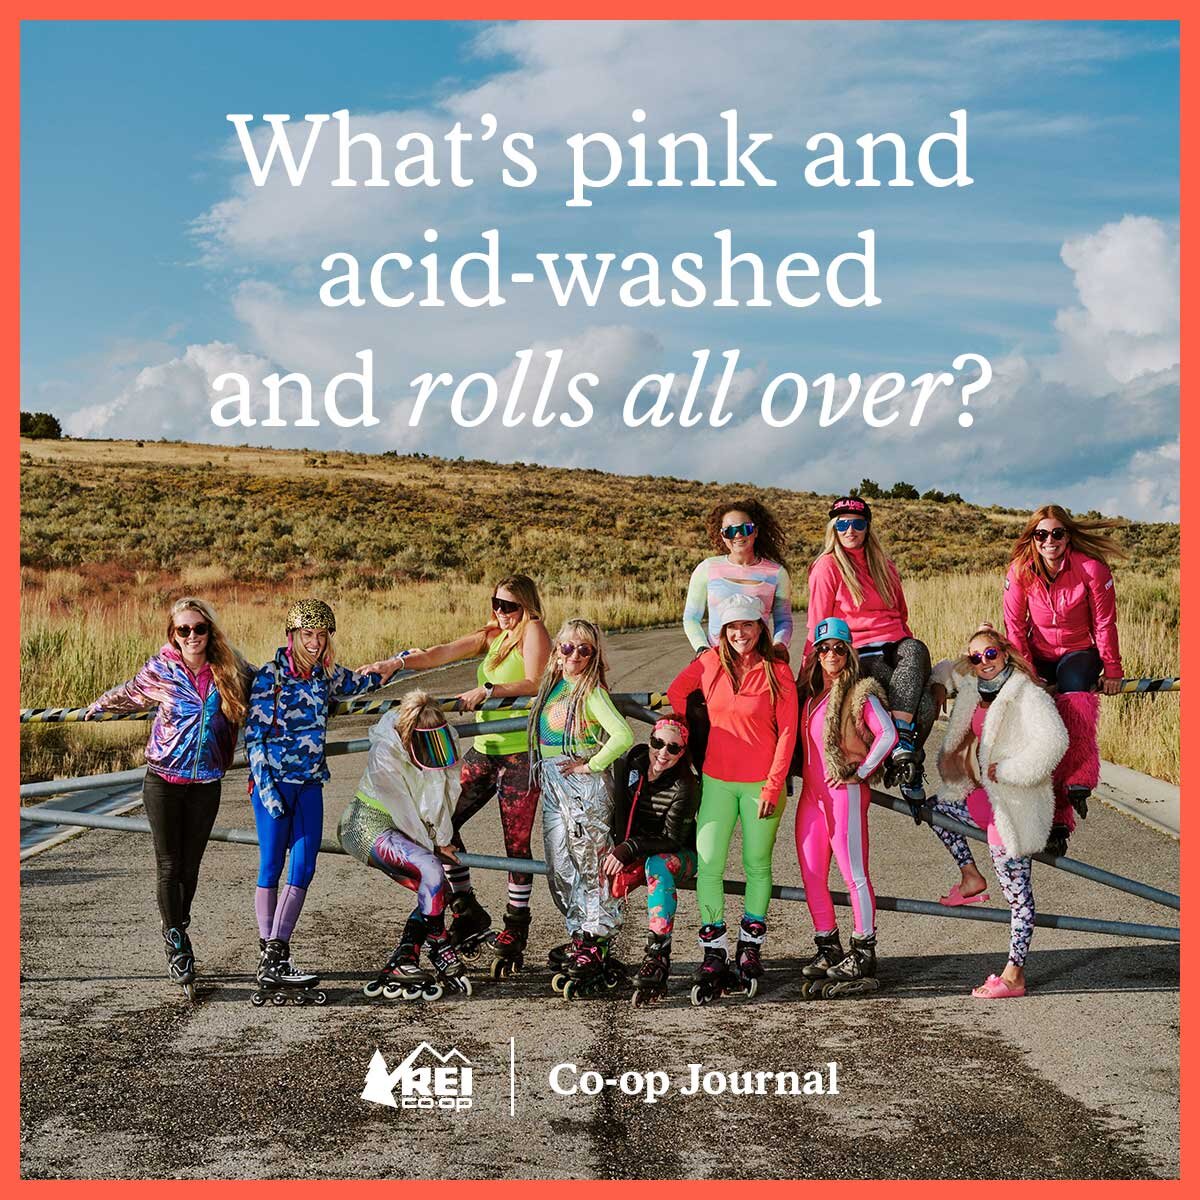 What's pink and acid-washed and rolls all over?